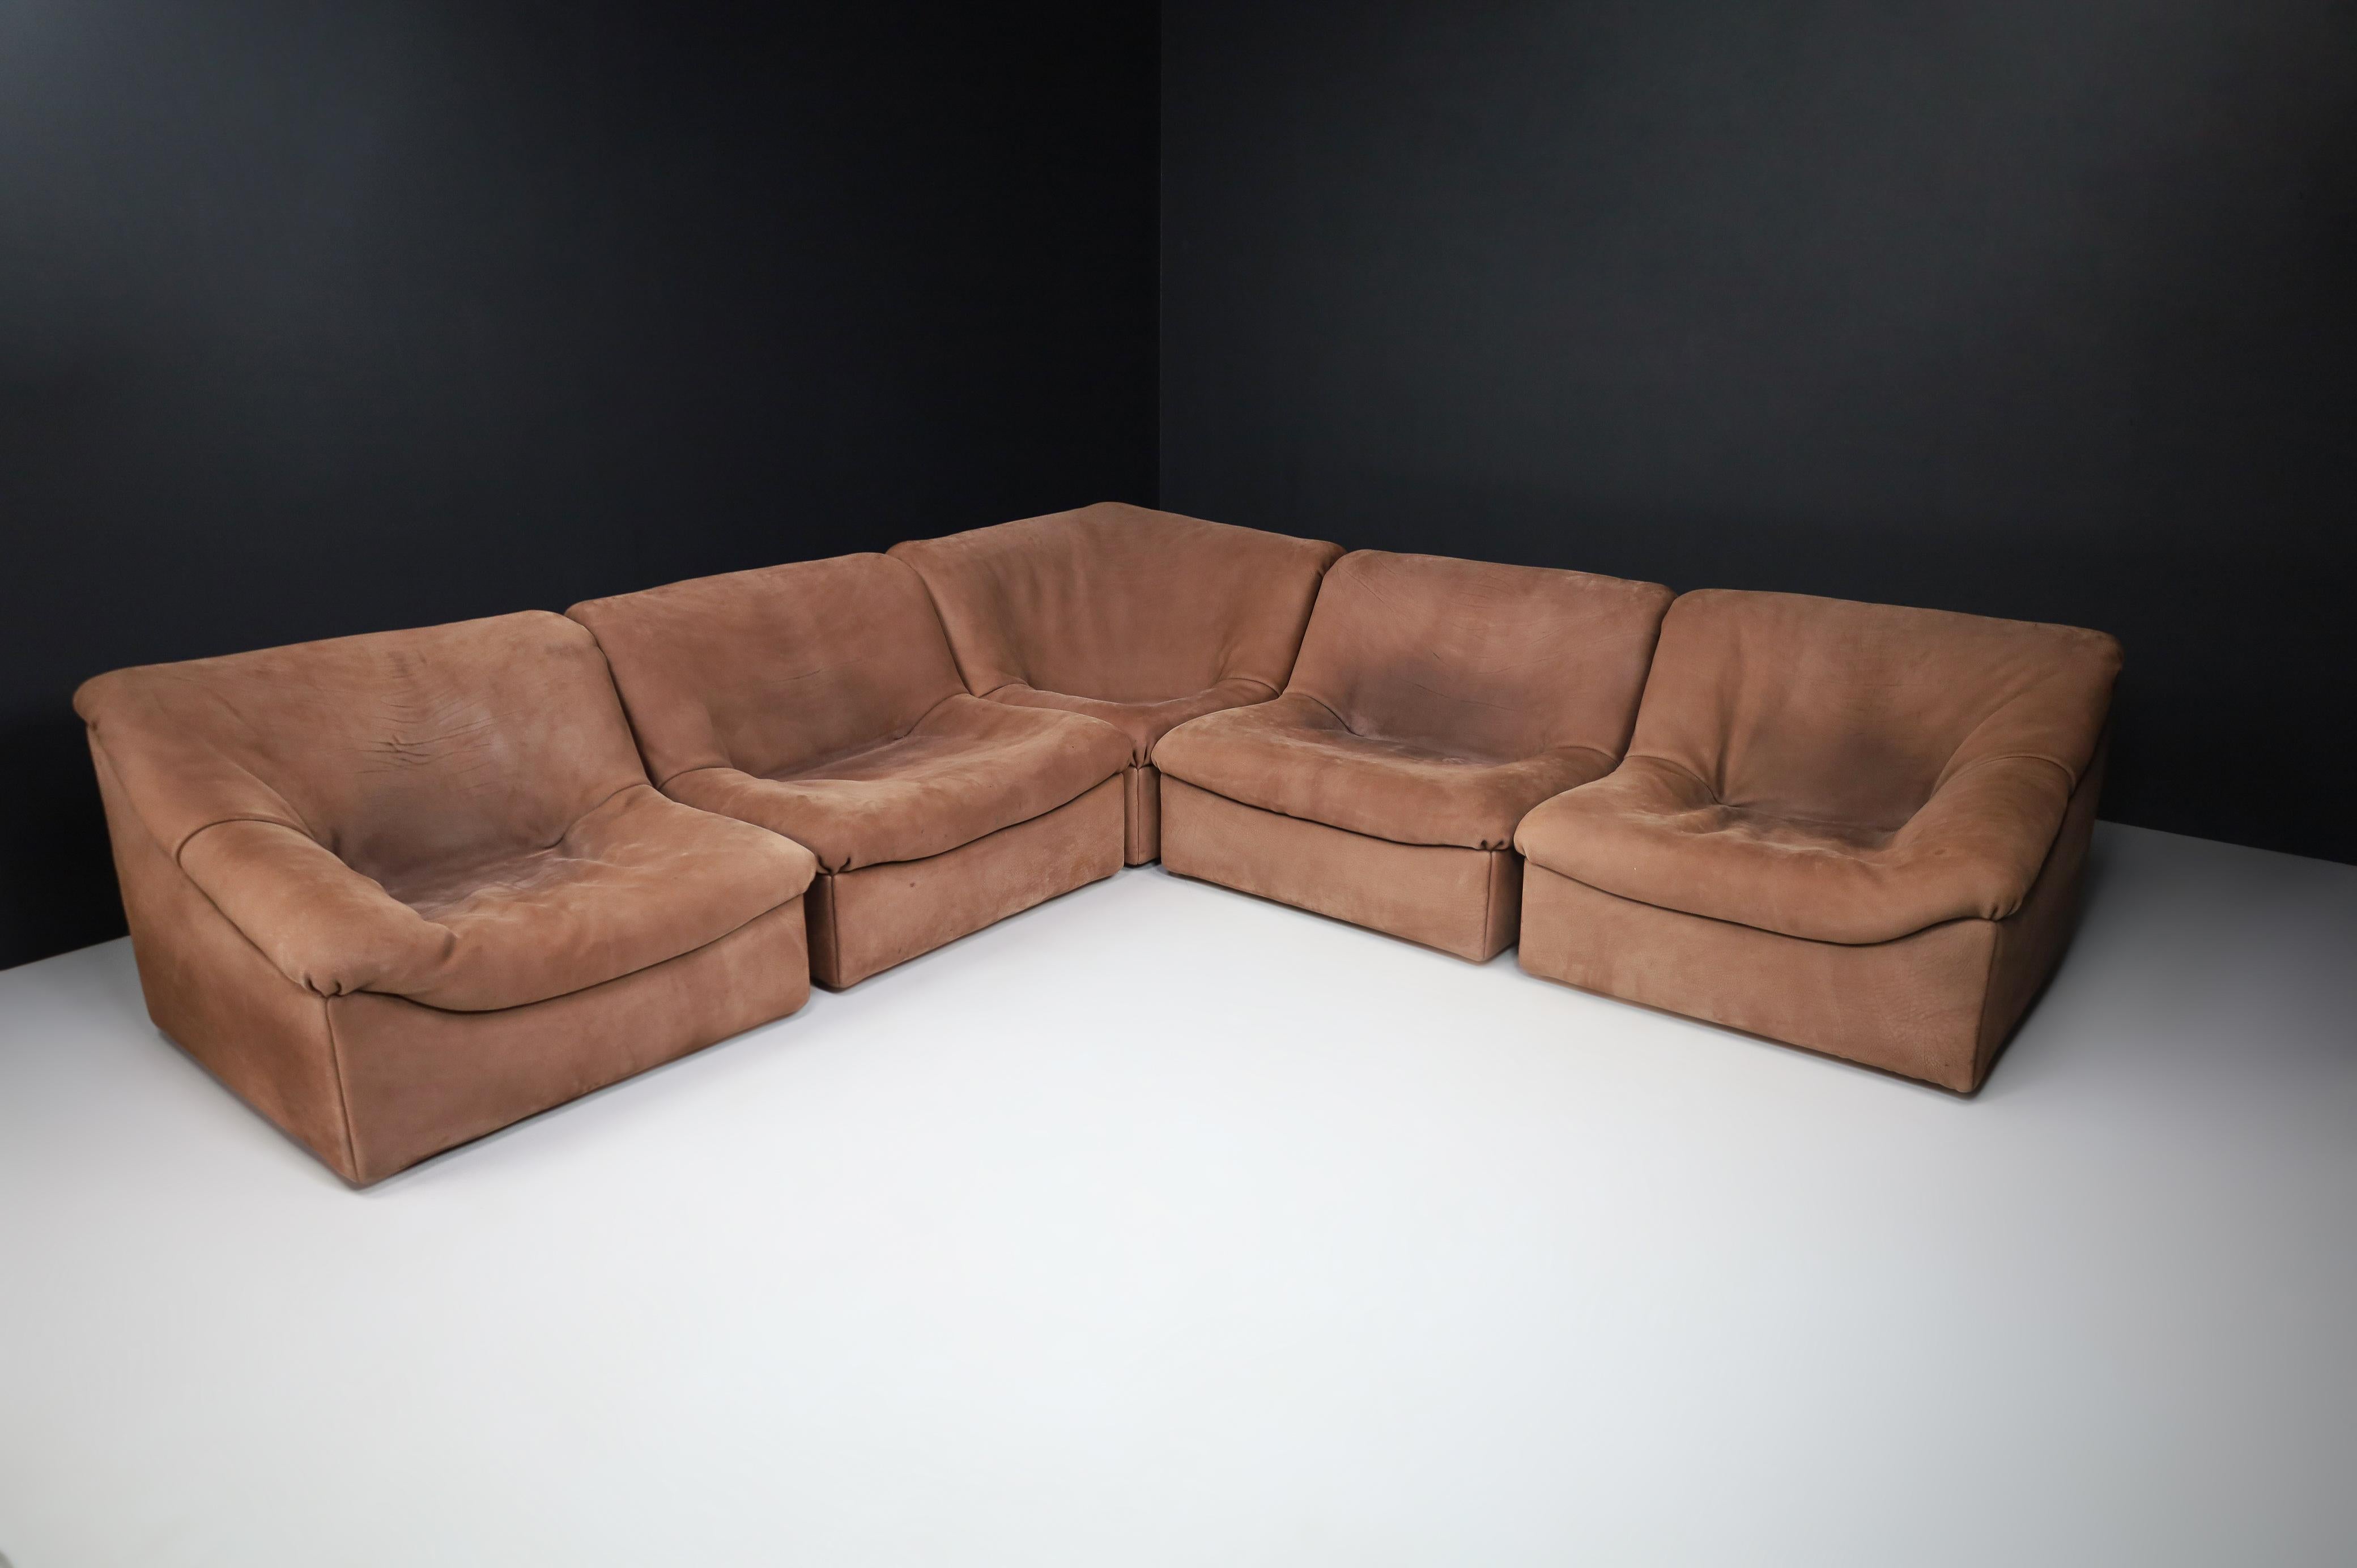 De Sede DS46 Sectional Sofa-Livingroomset in Buffalo Leather, Switzerland 1970s For Sale 11